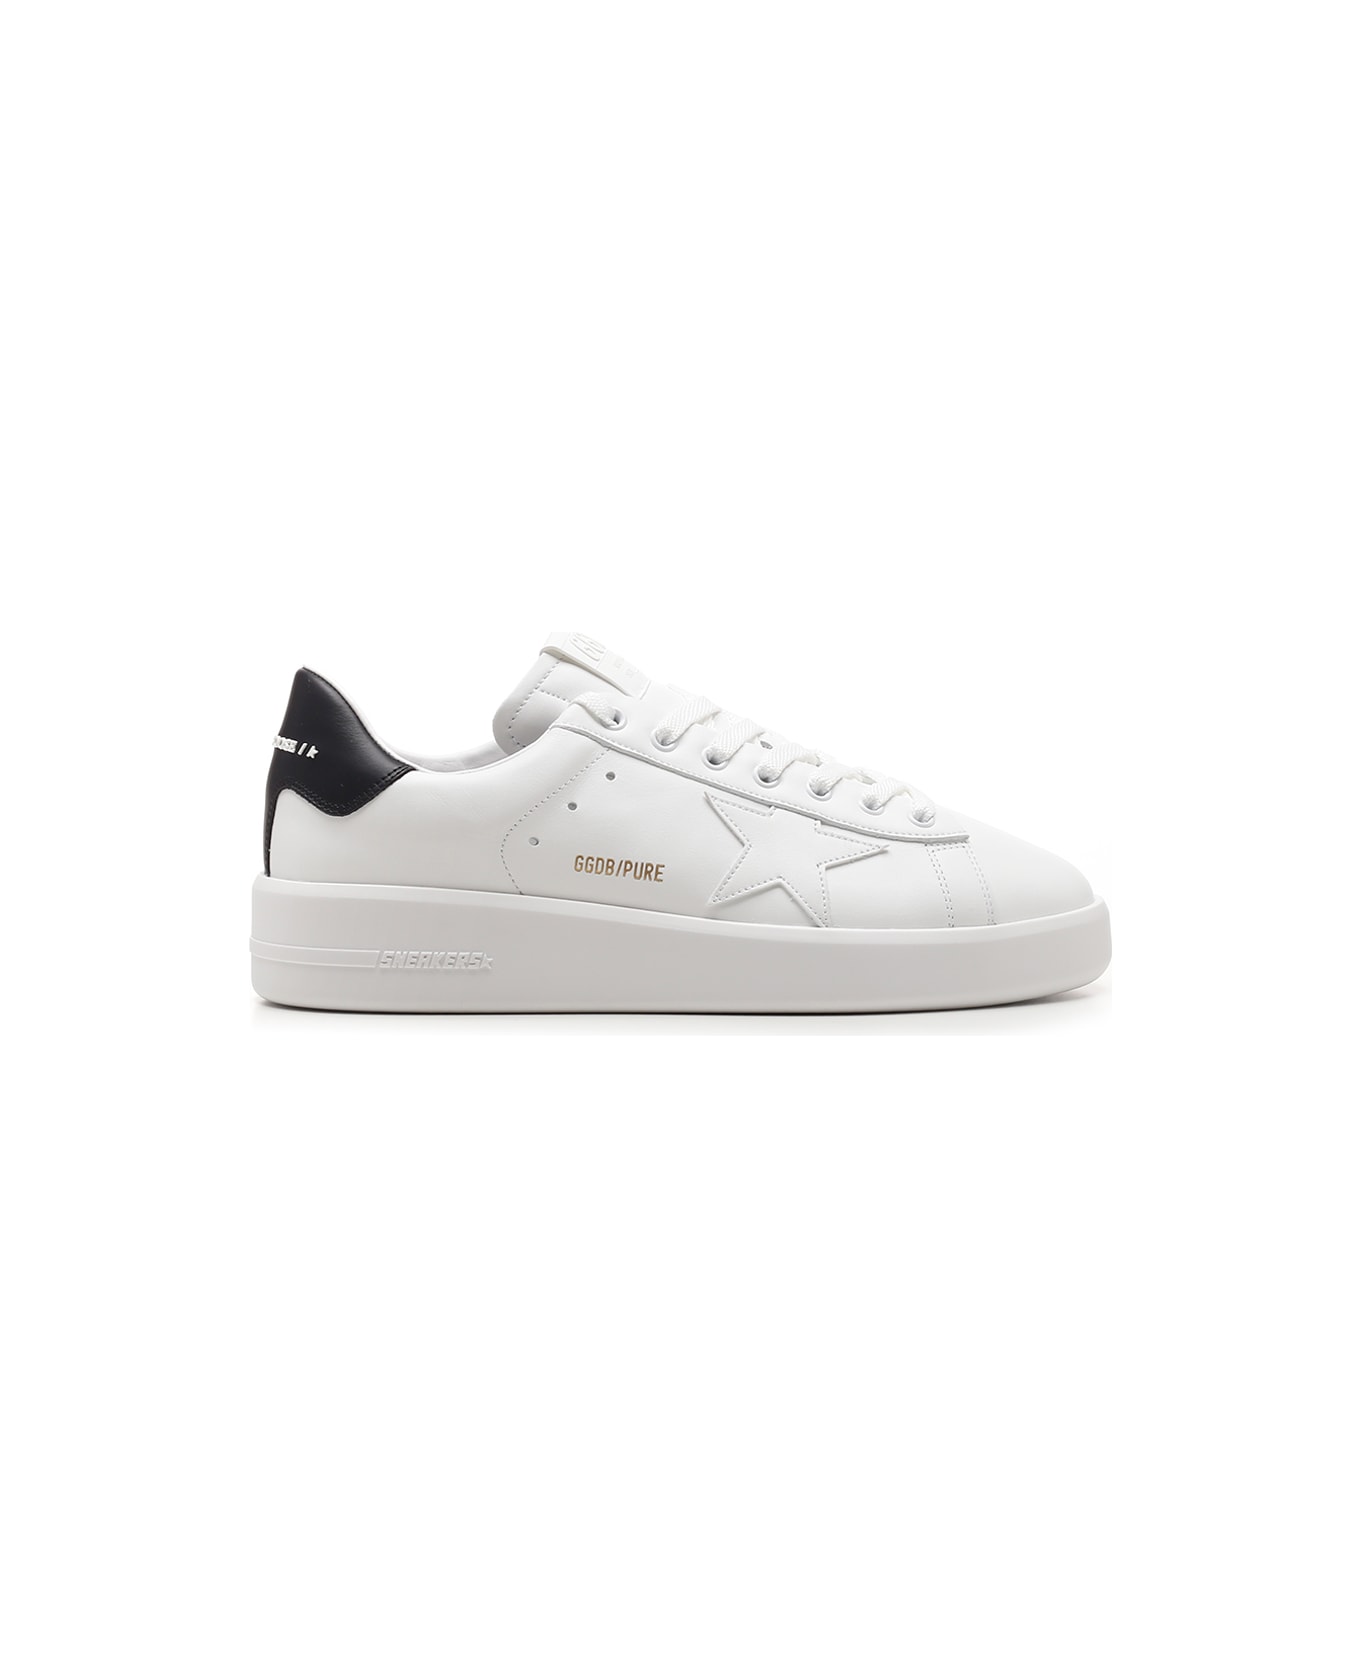 Golden Goose Pure Star Sneakers - White/Black